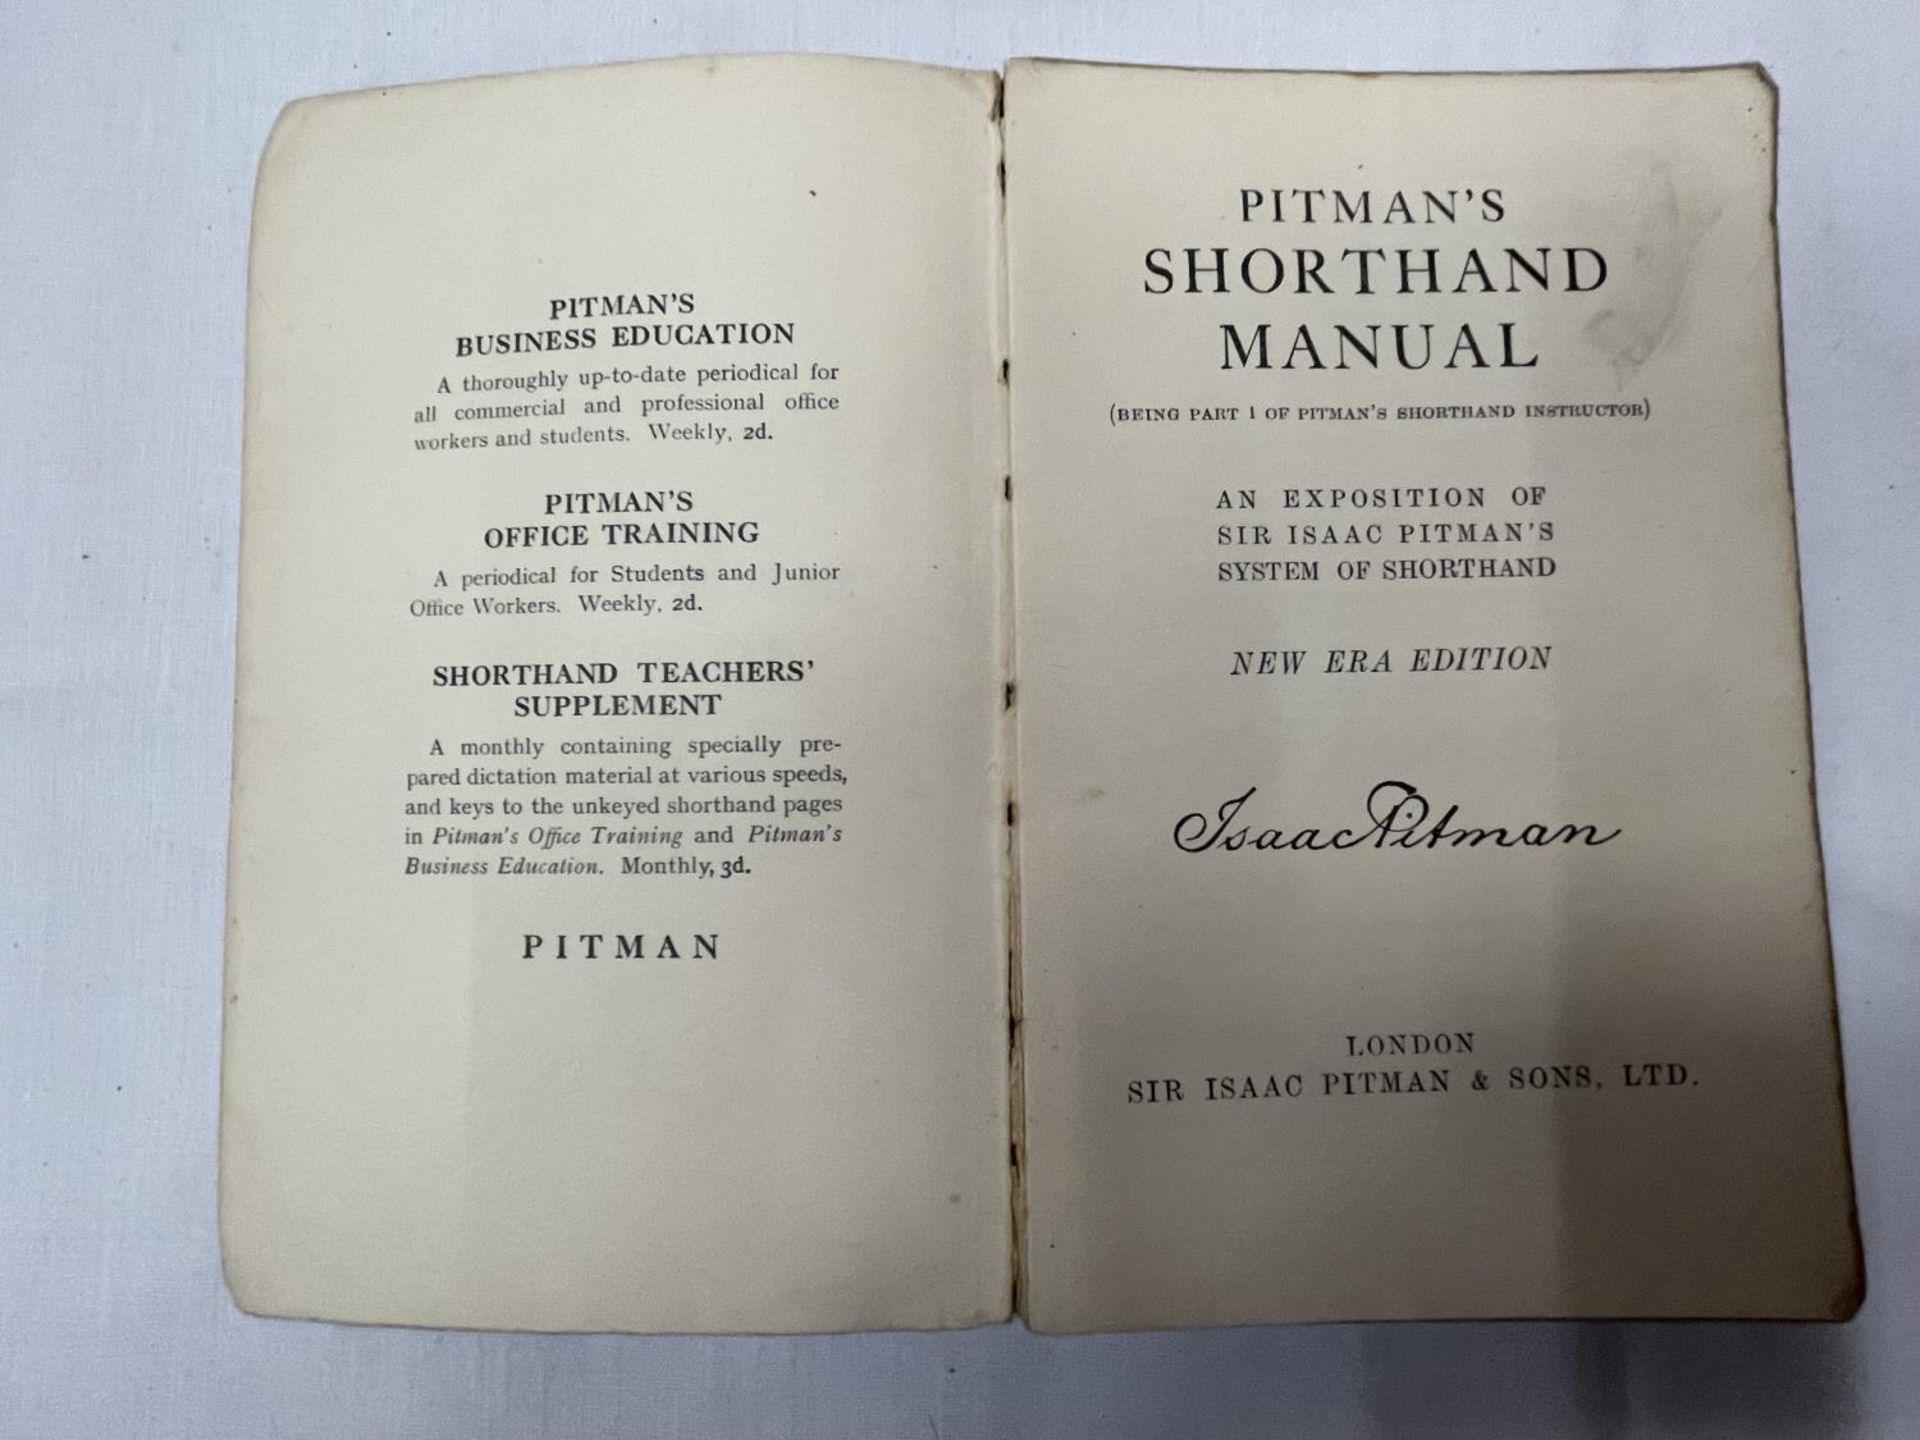 A FIRST EDITION PITMANS NEW ERA EDITION SHORTHAMD MANUAL - Image 2 of 3